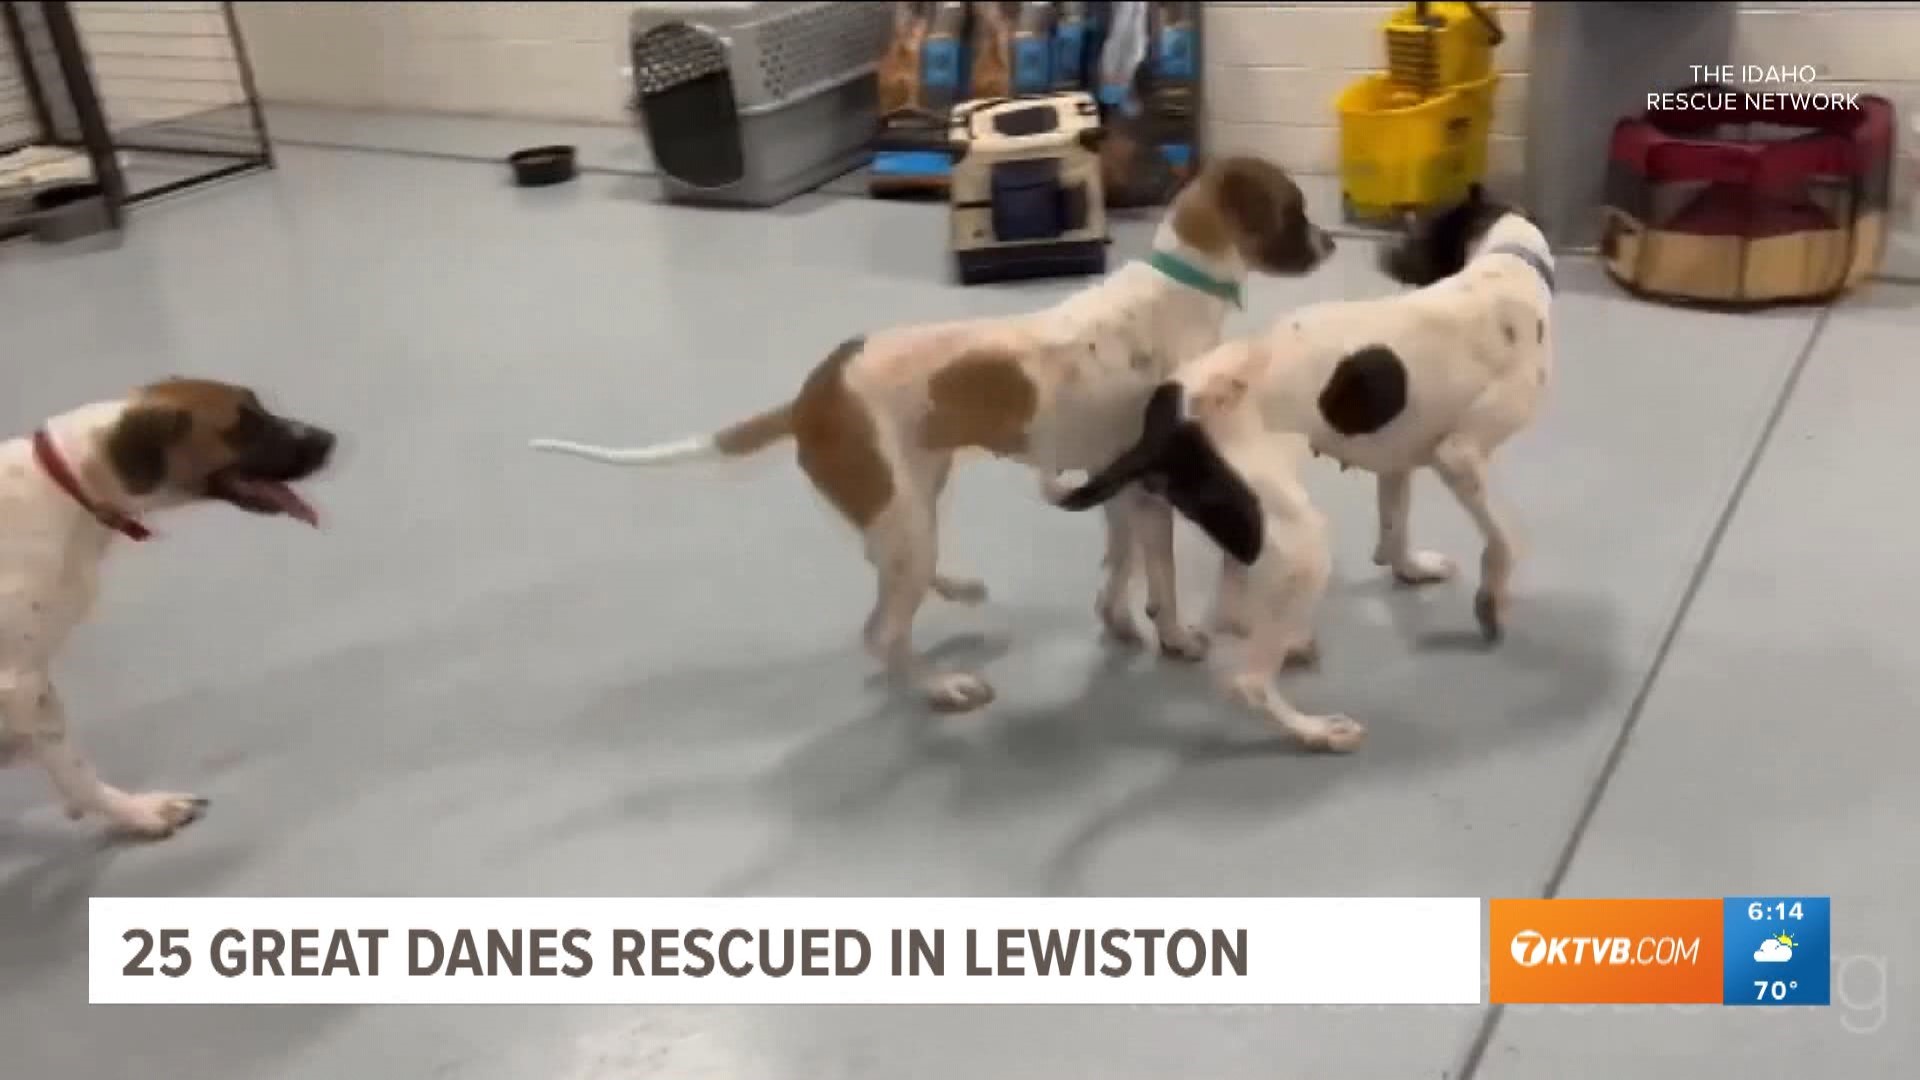 The dogs were taken from a home in Lewiston, Idaho.